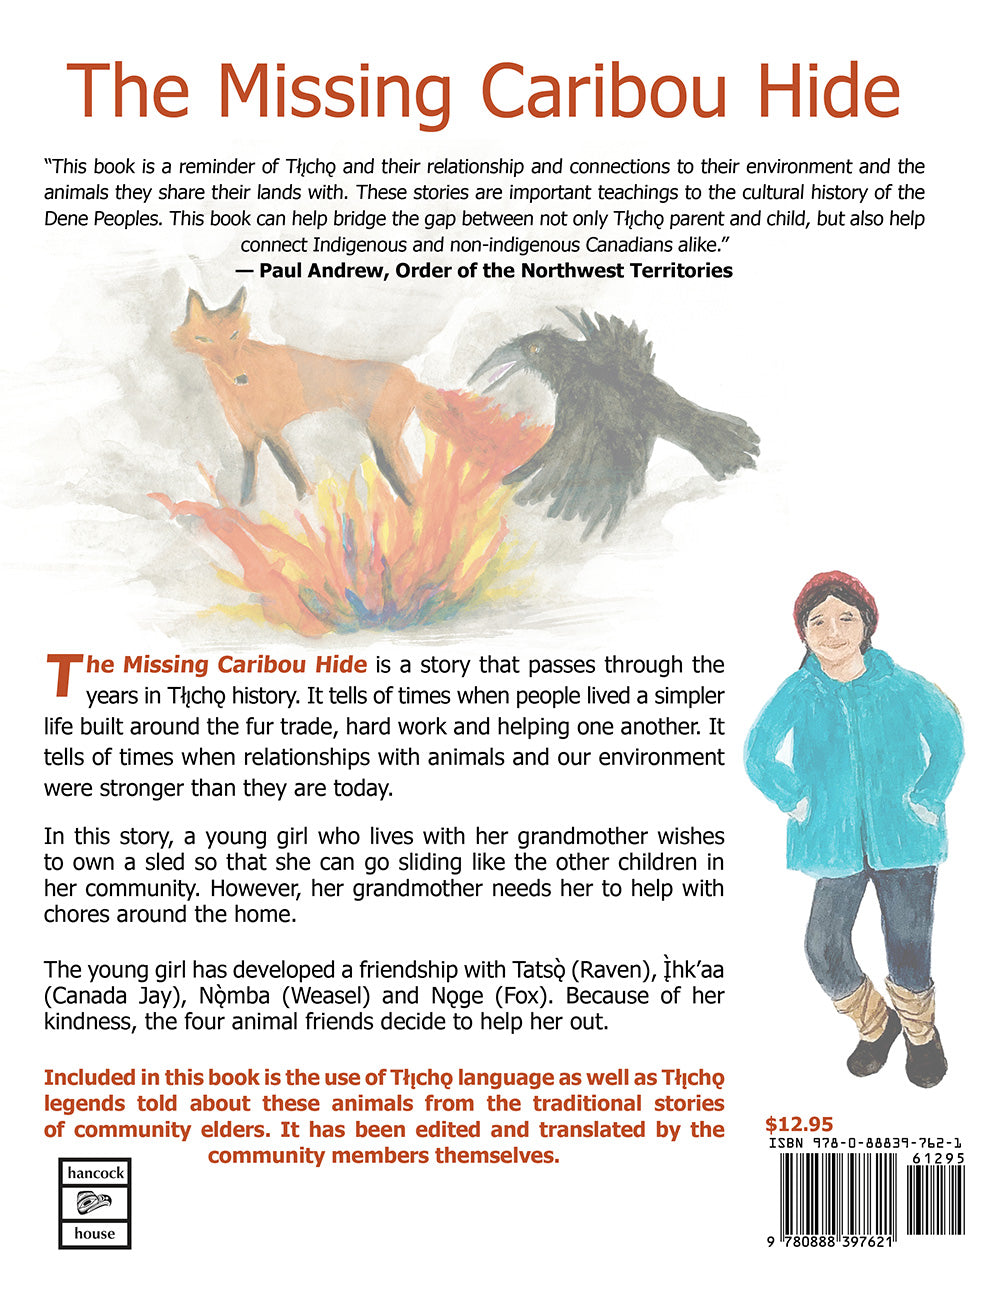 The Missing Caribou Hide: Traditional Tłı̨chǫ Stories and Legends